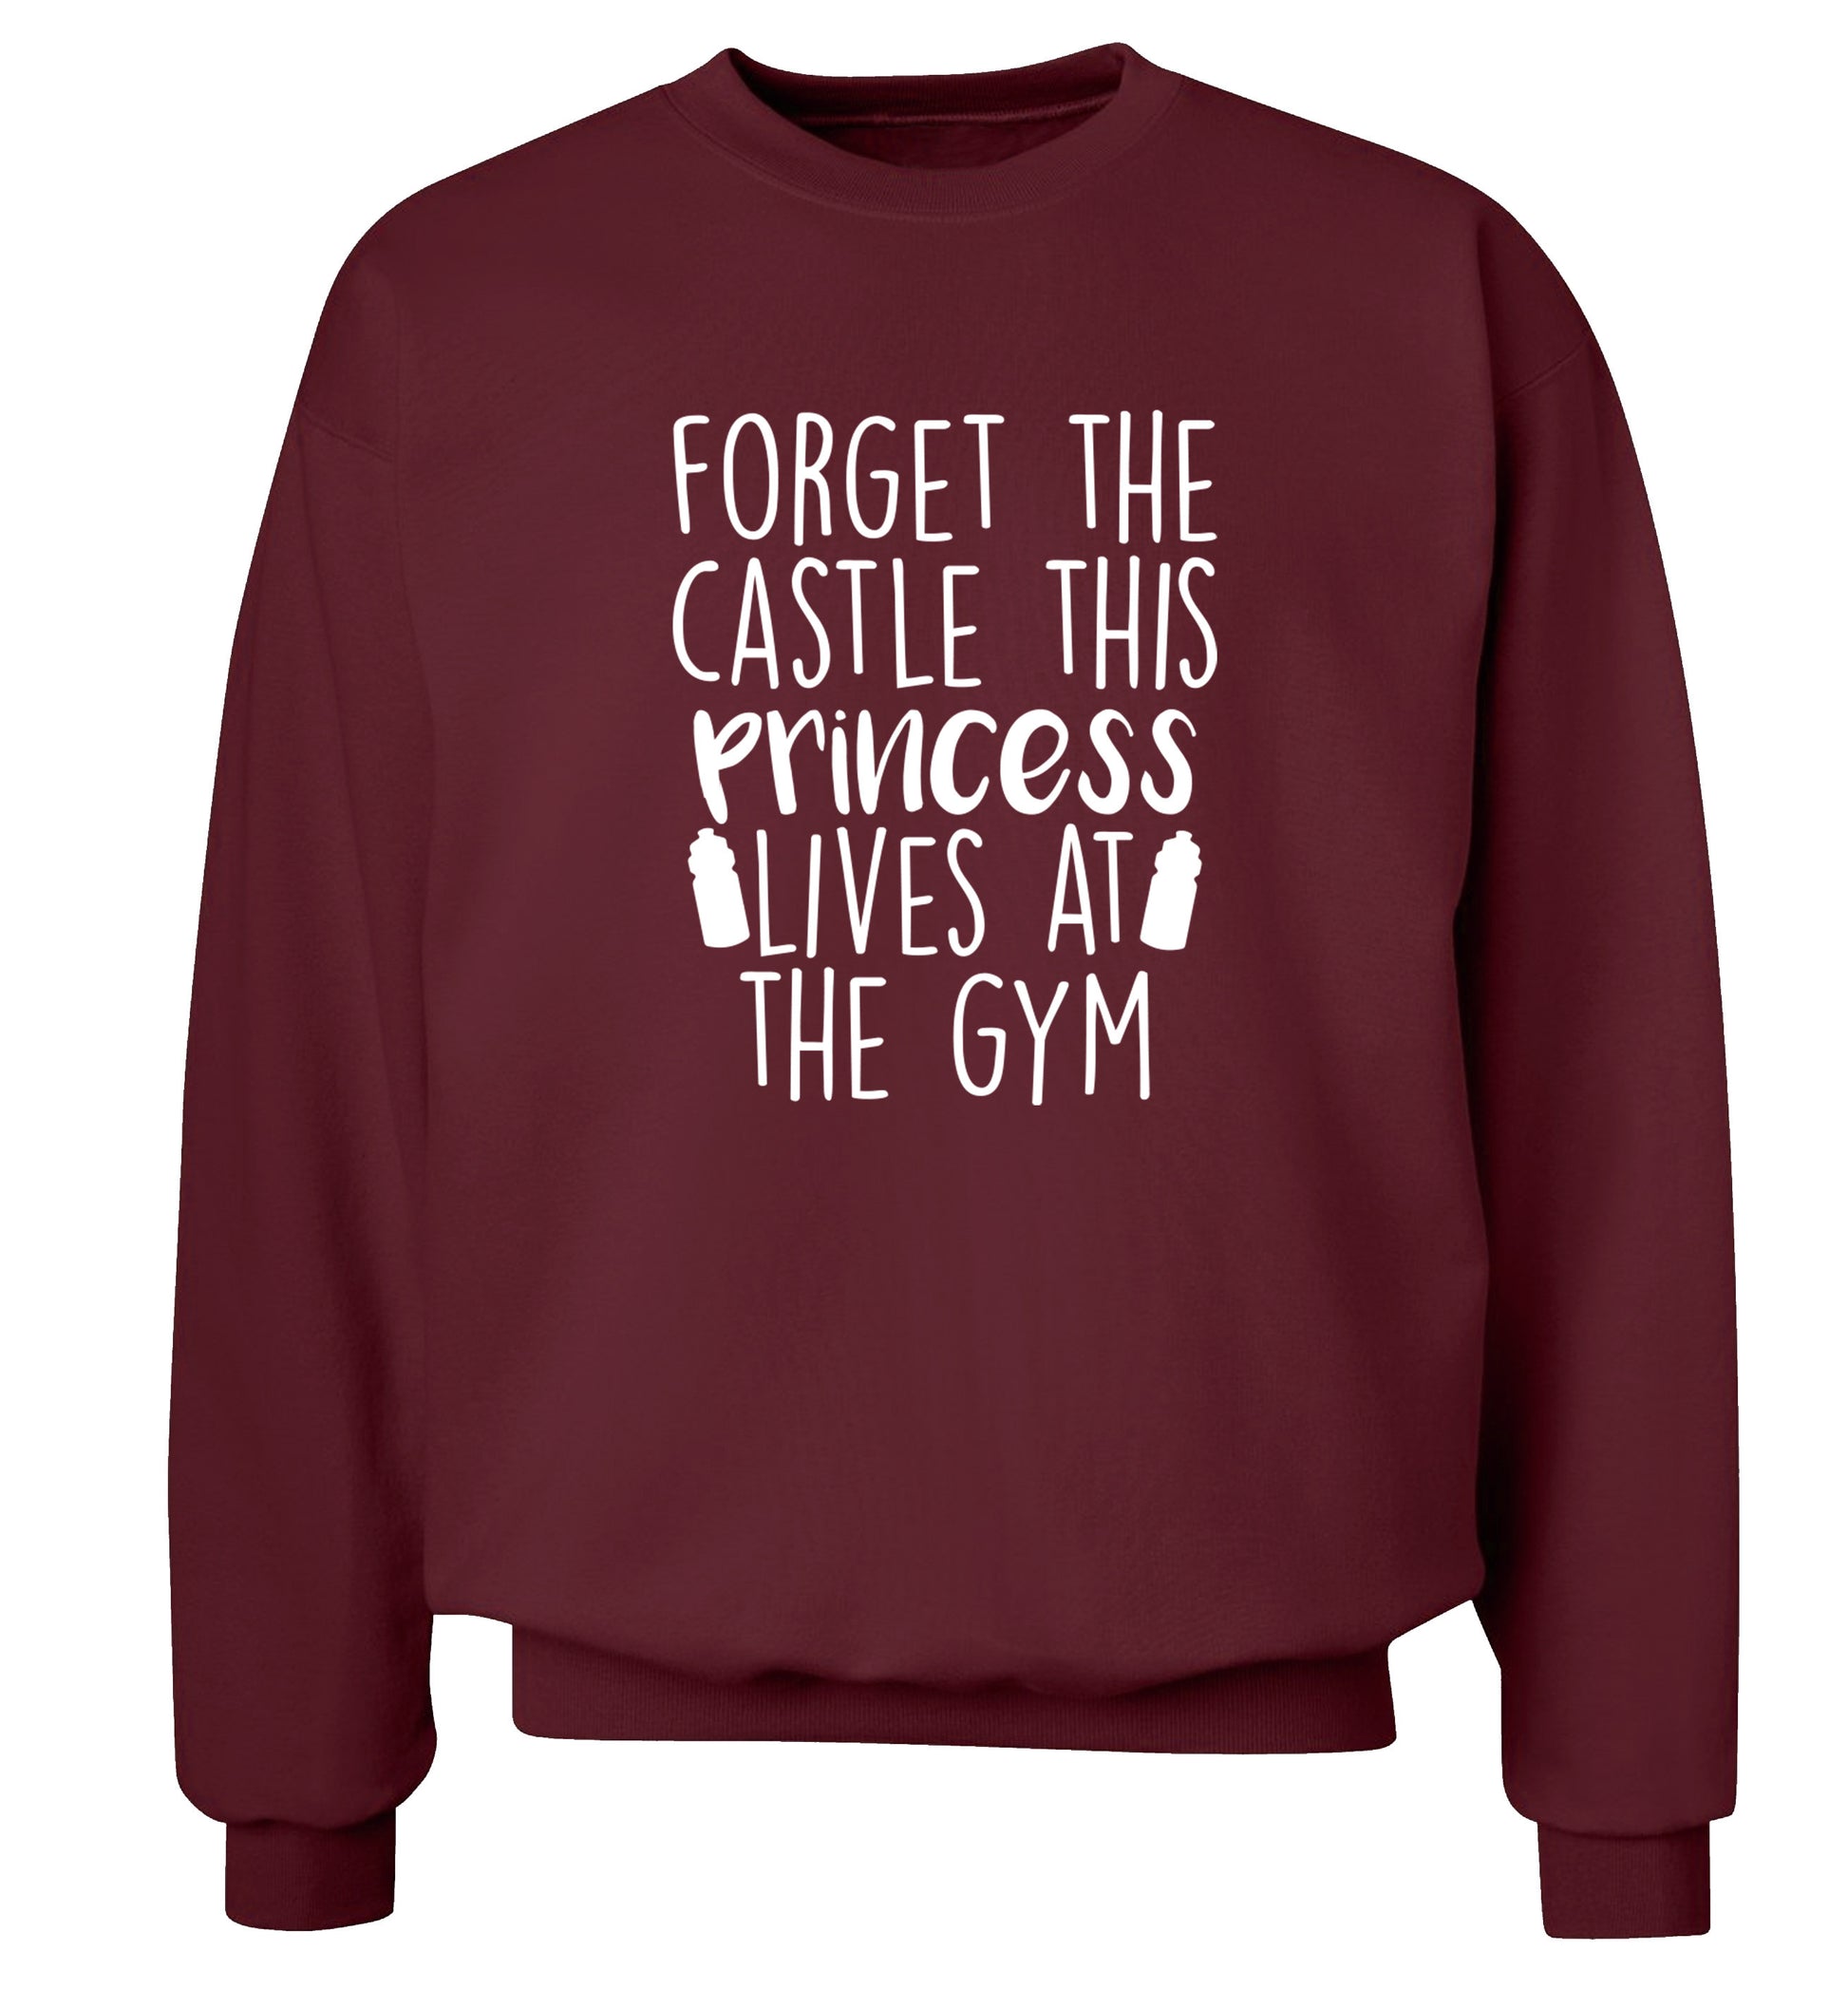 Forget the castle this princess lives at the gym Adult's unisex maroon Sweater 2XL